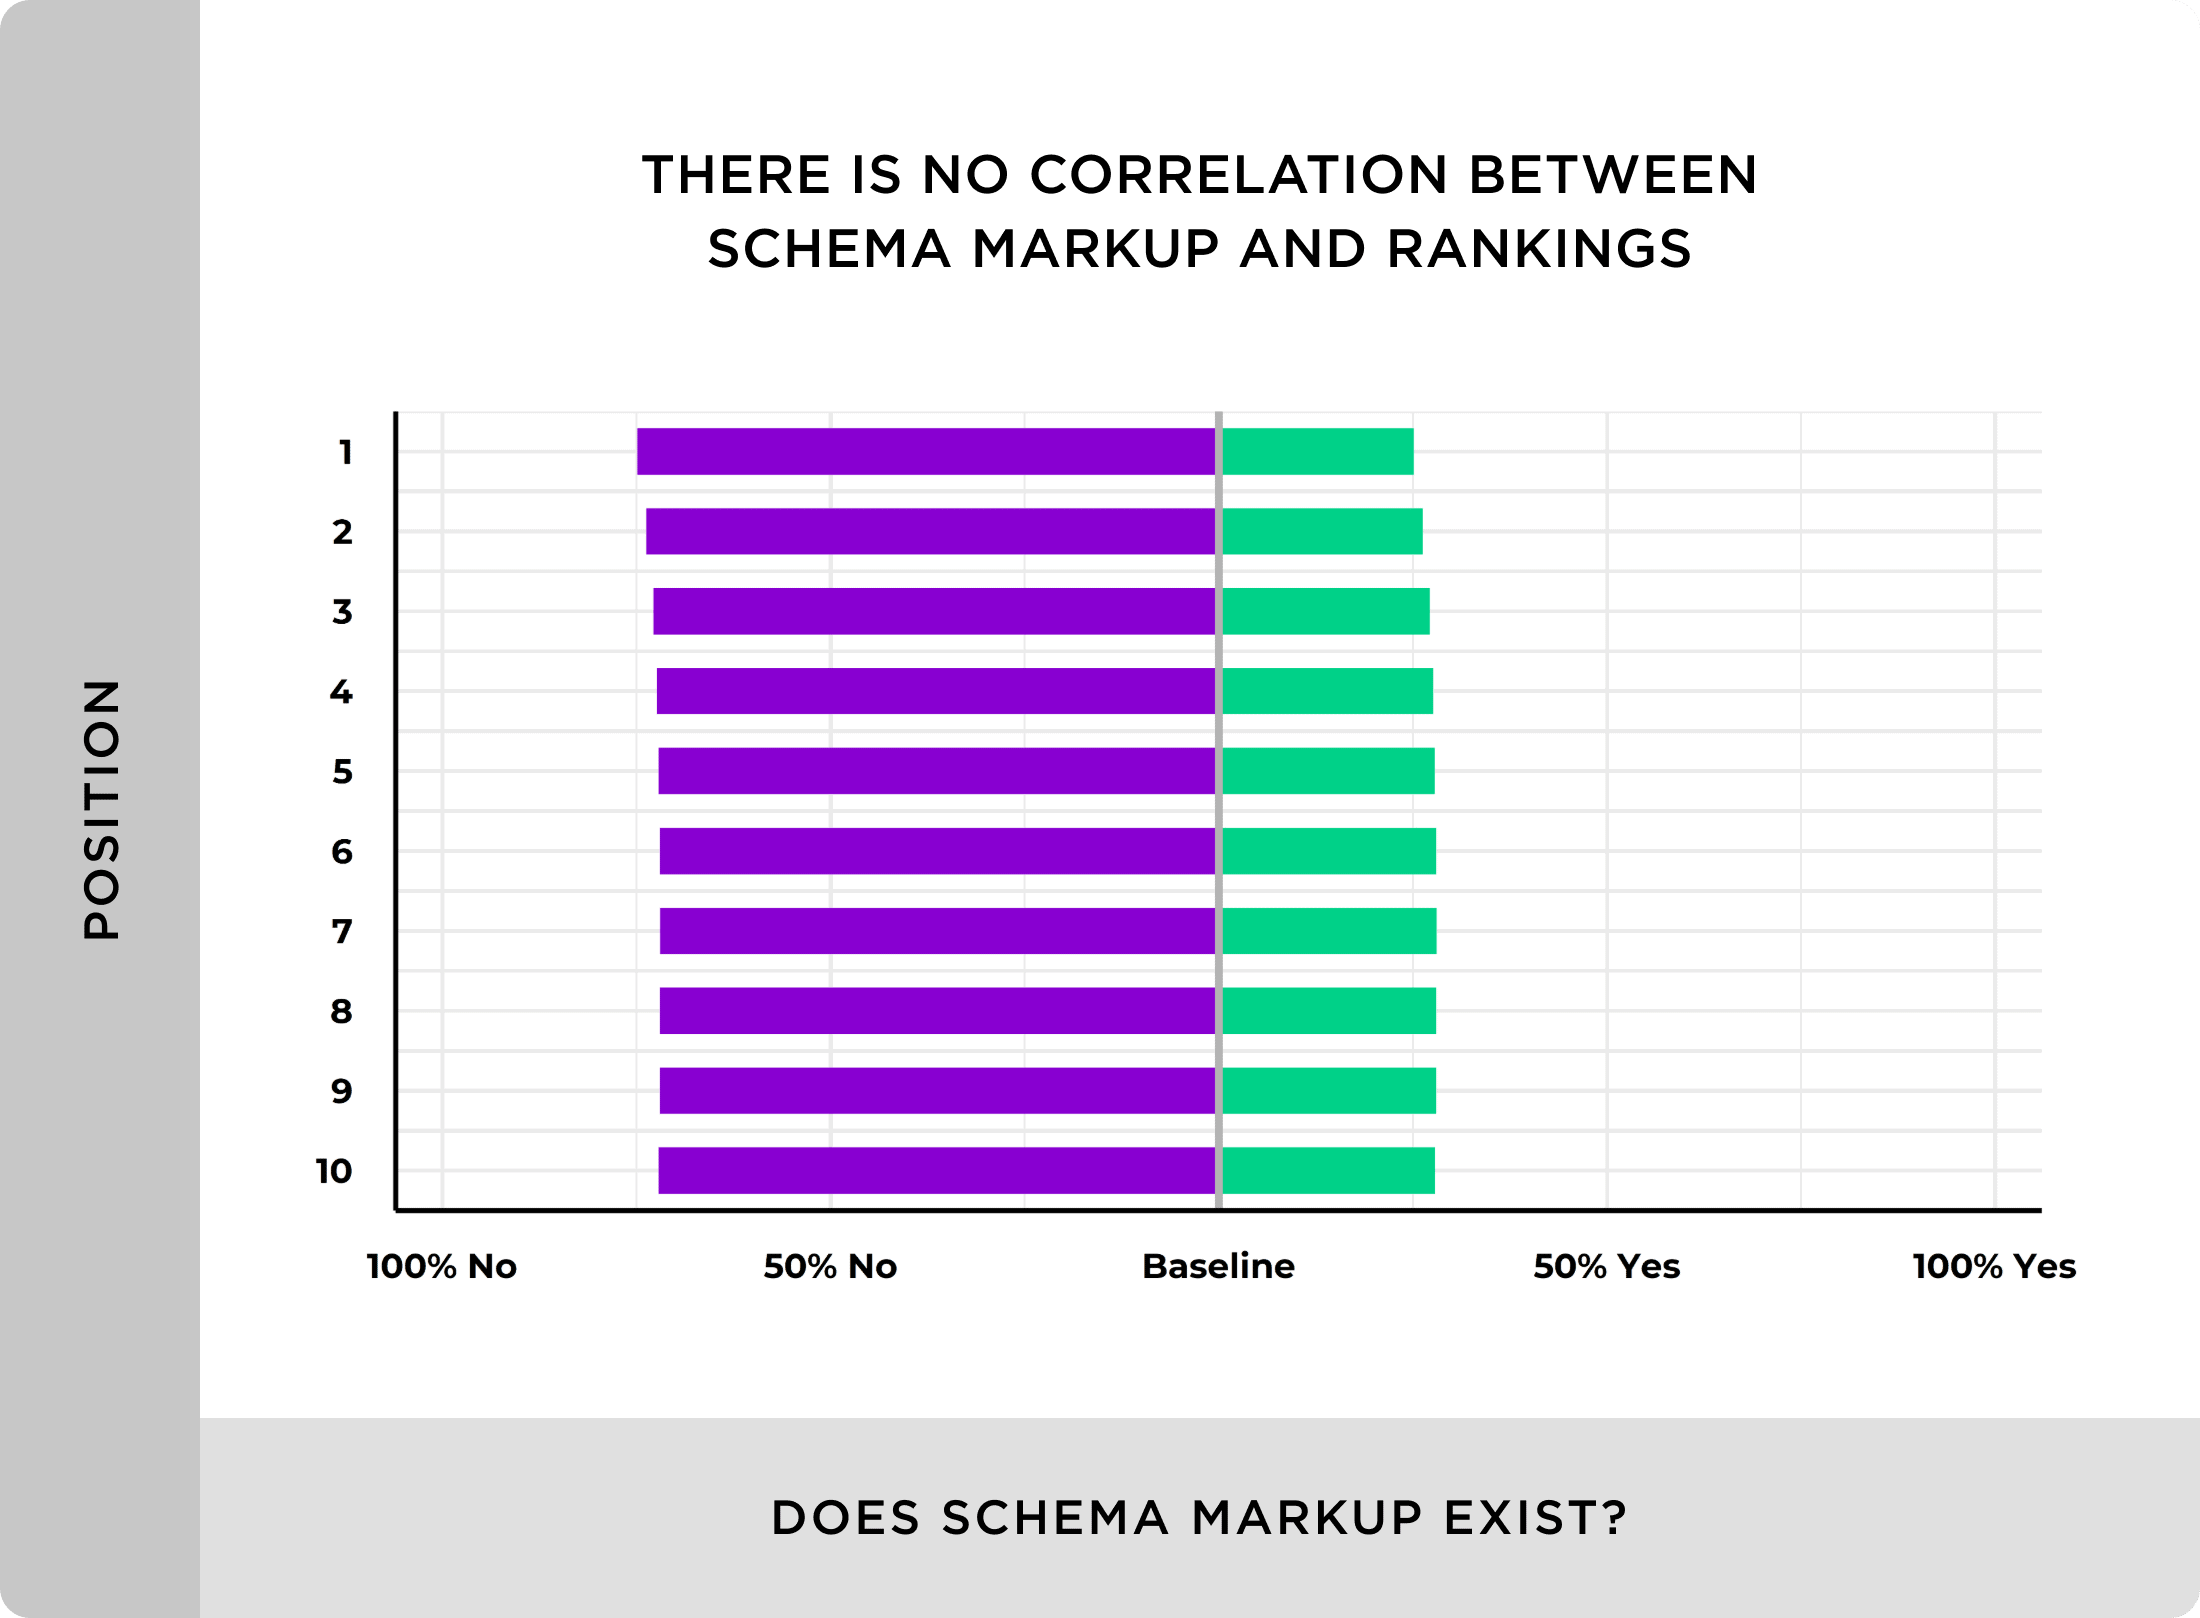 There is no correlation between schema markup and rankings